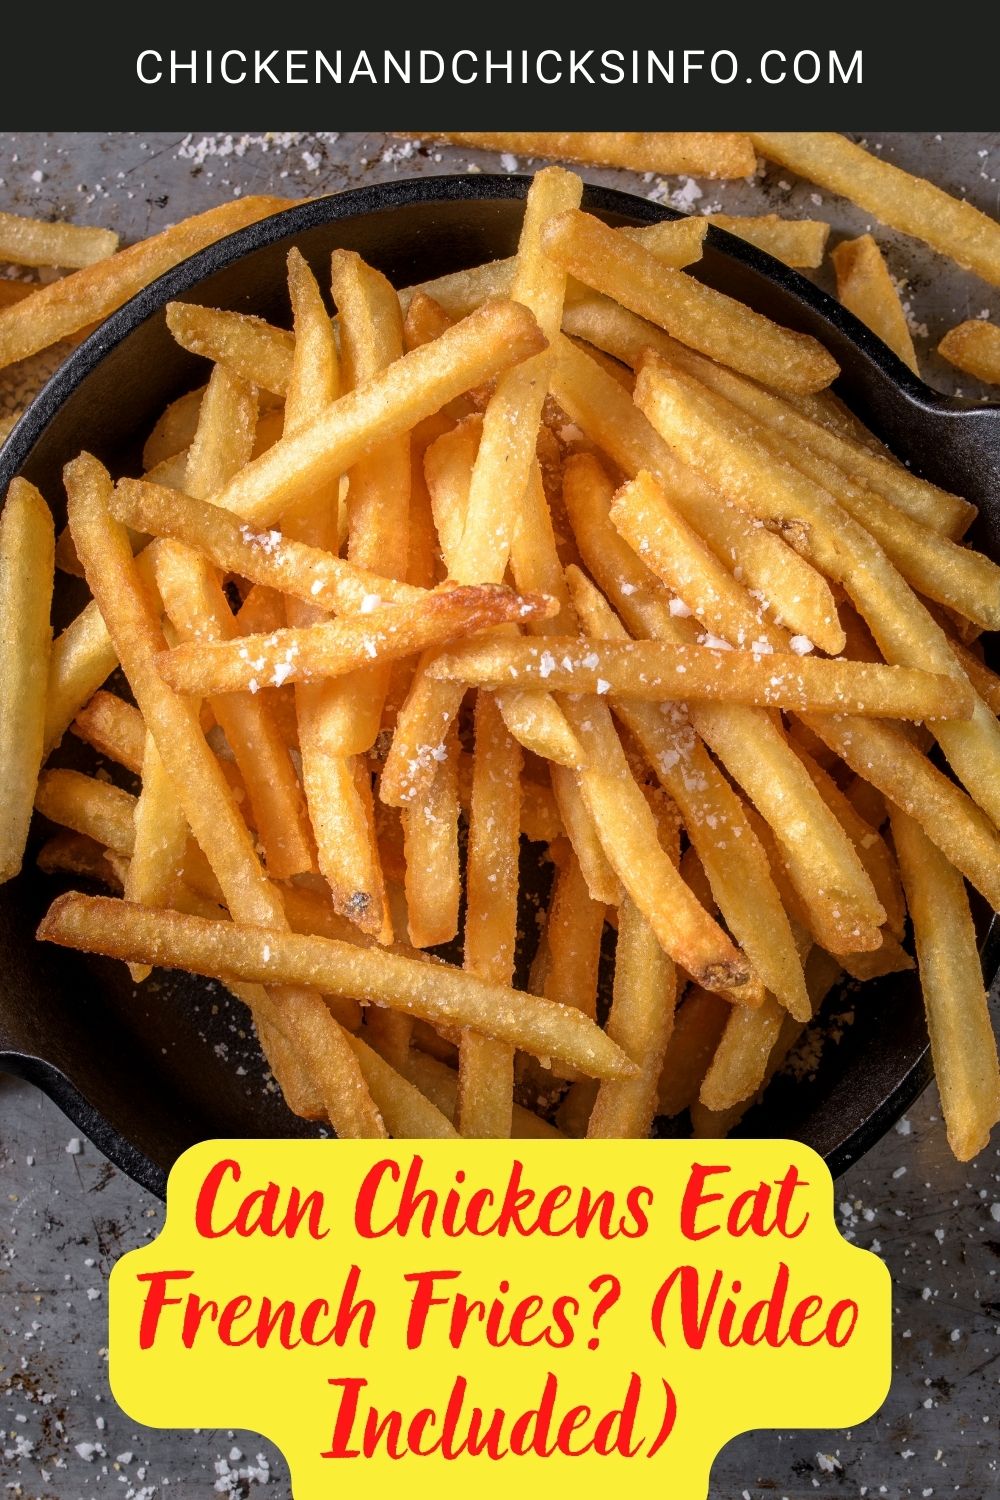 Can Chickens Eat French Fries? (Video Included) poster.
